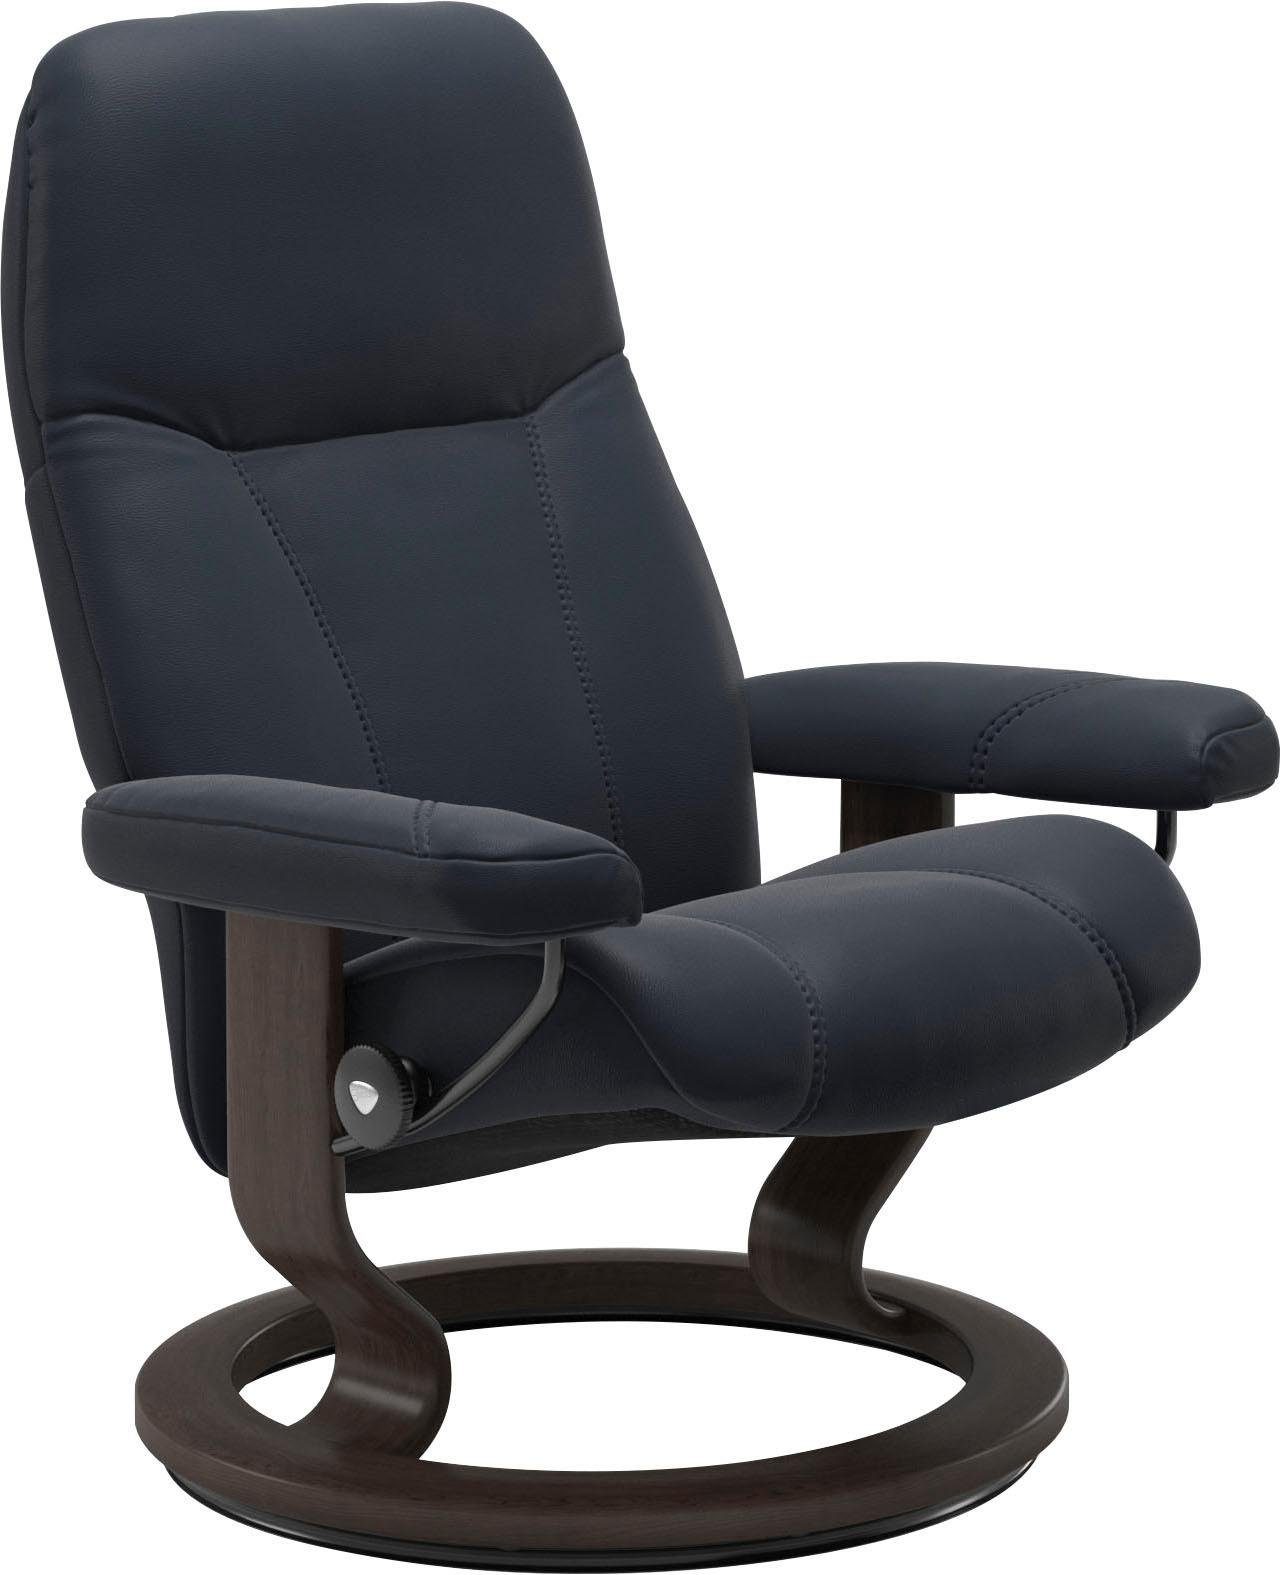 Stressless® Relaxsessel Consul, mit Classic Base, Größe L, Gestell Wenge | Funktionssessel